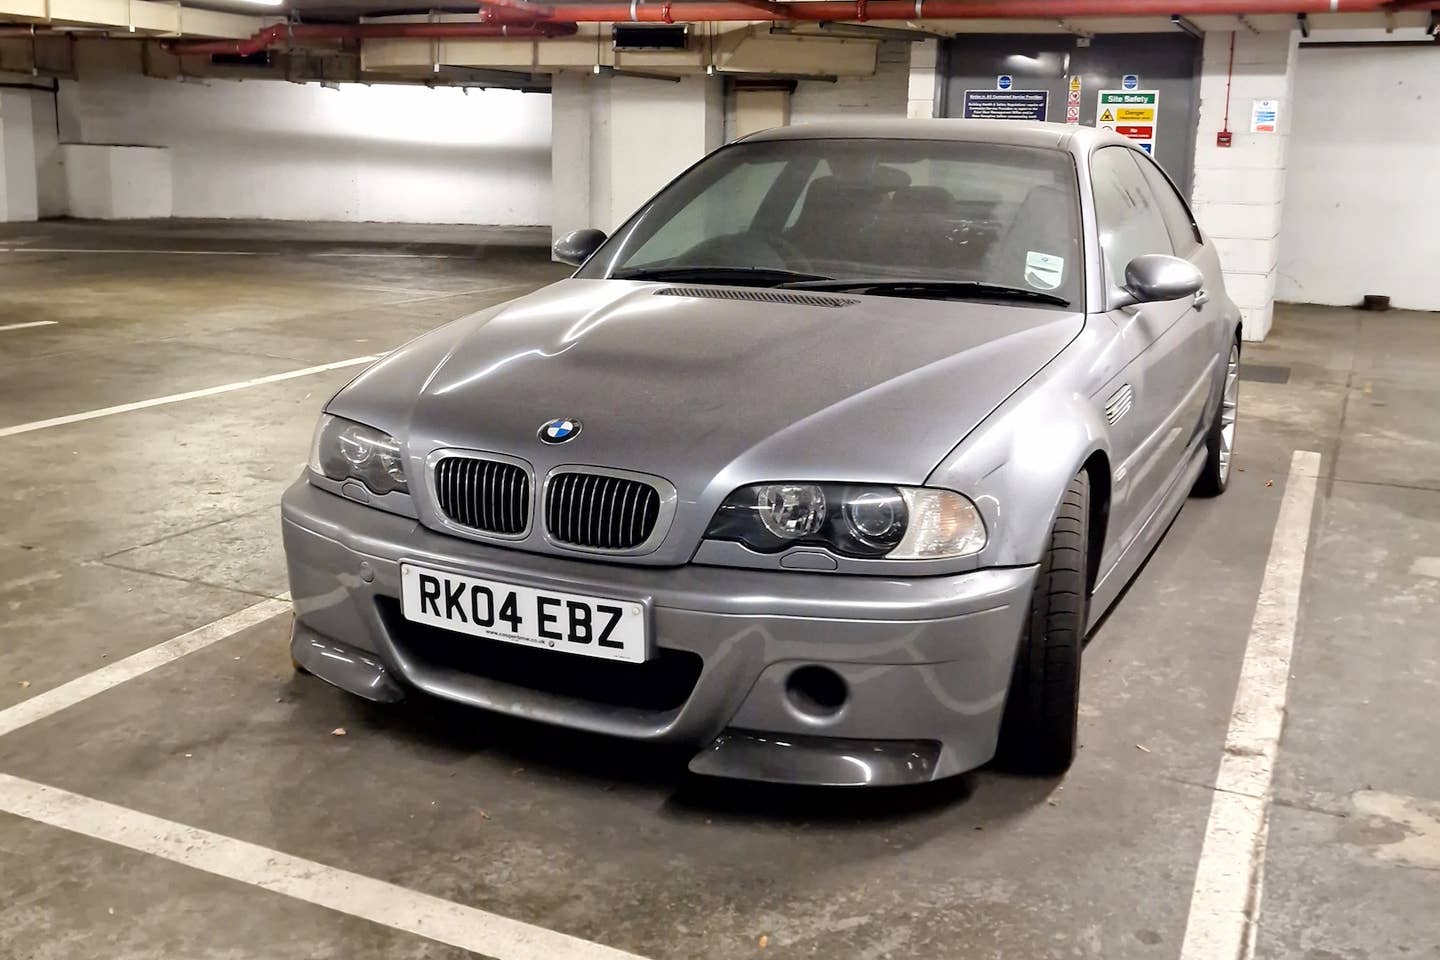 2004 BMW M3 CSL neglected in a London parking garage.